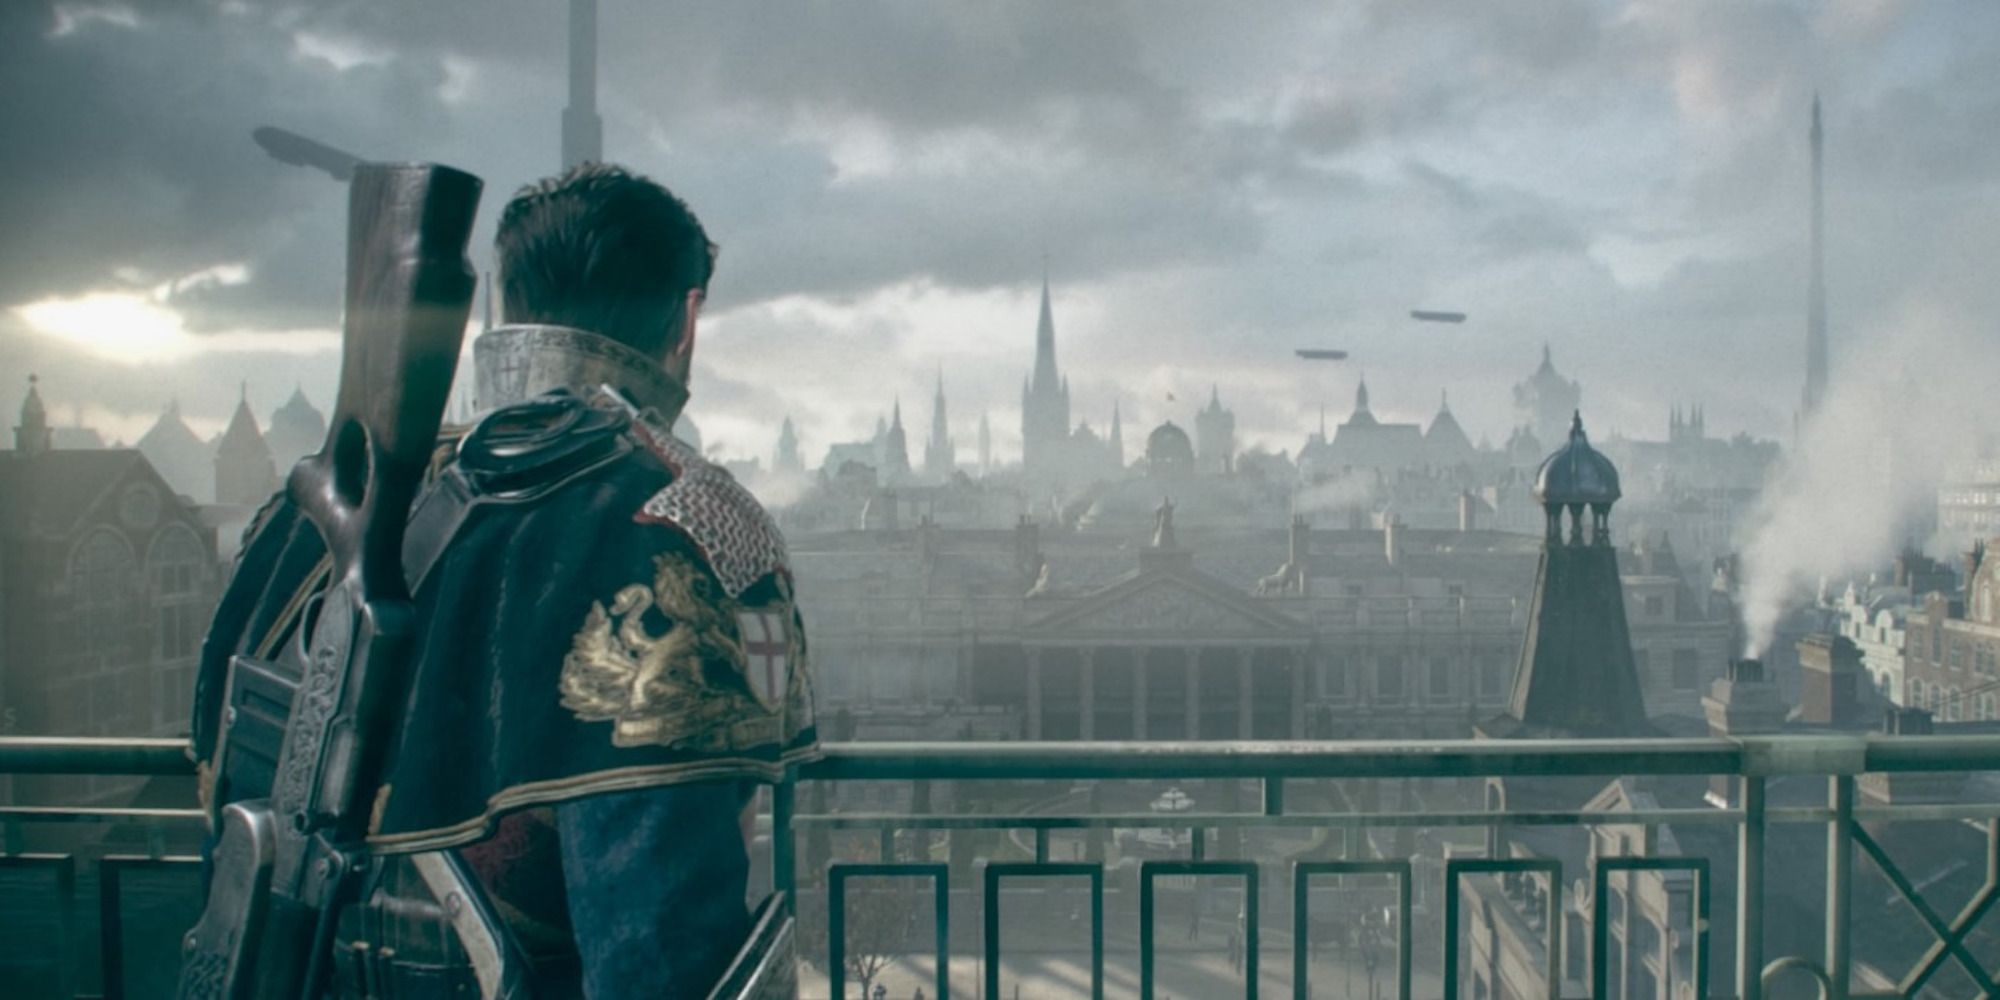 Overlooking the city in The Order 1886